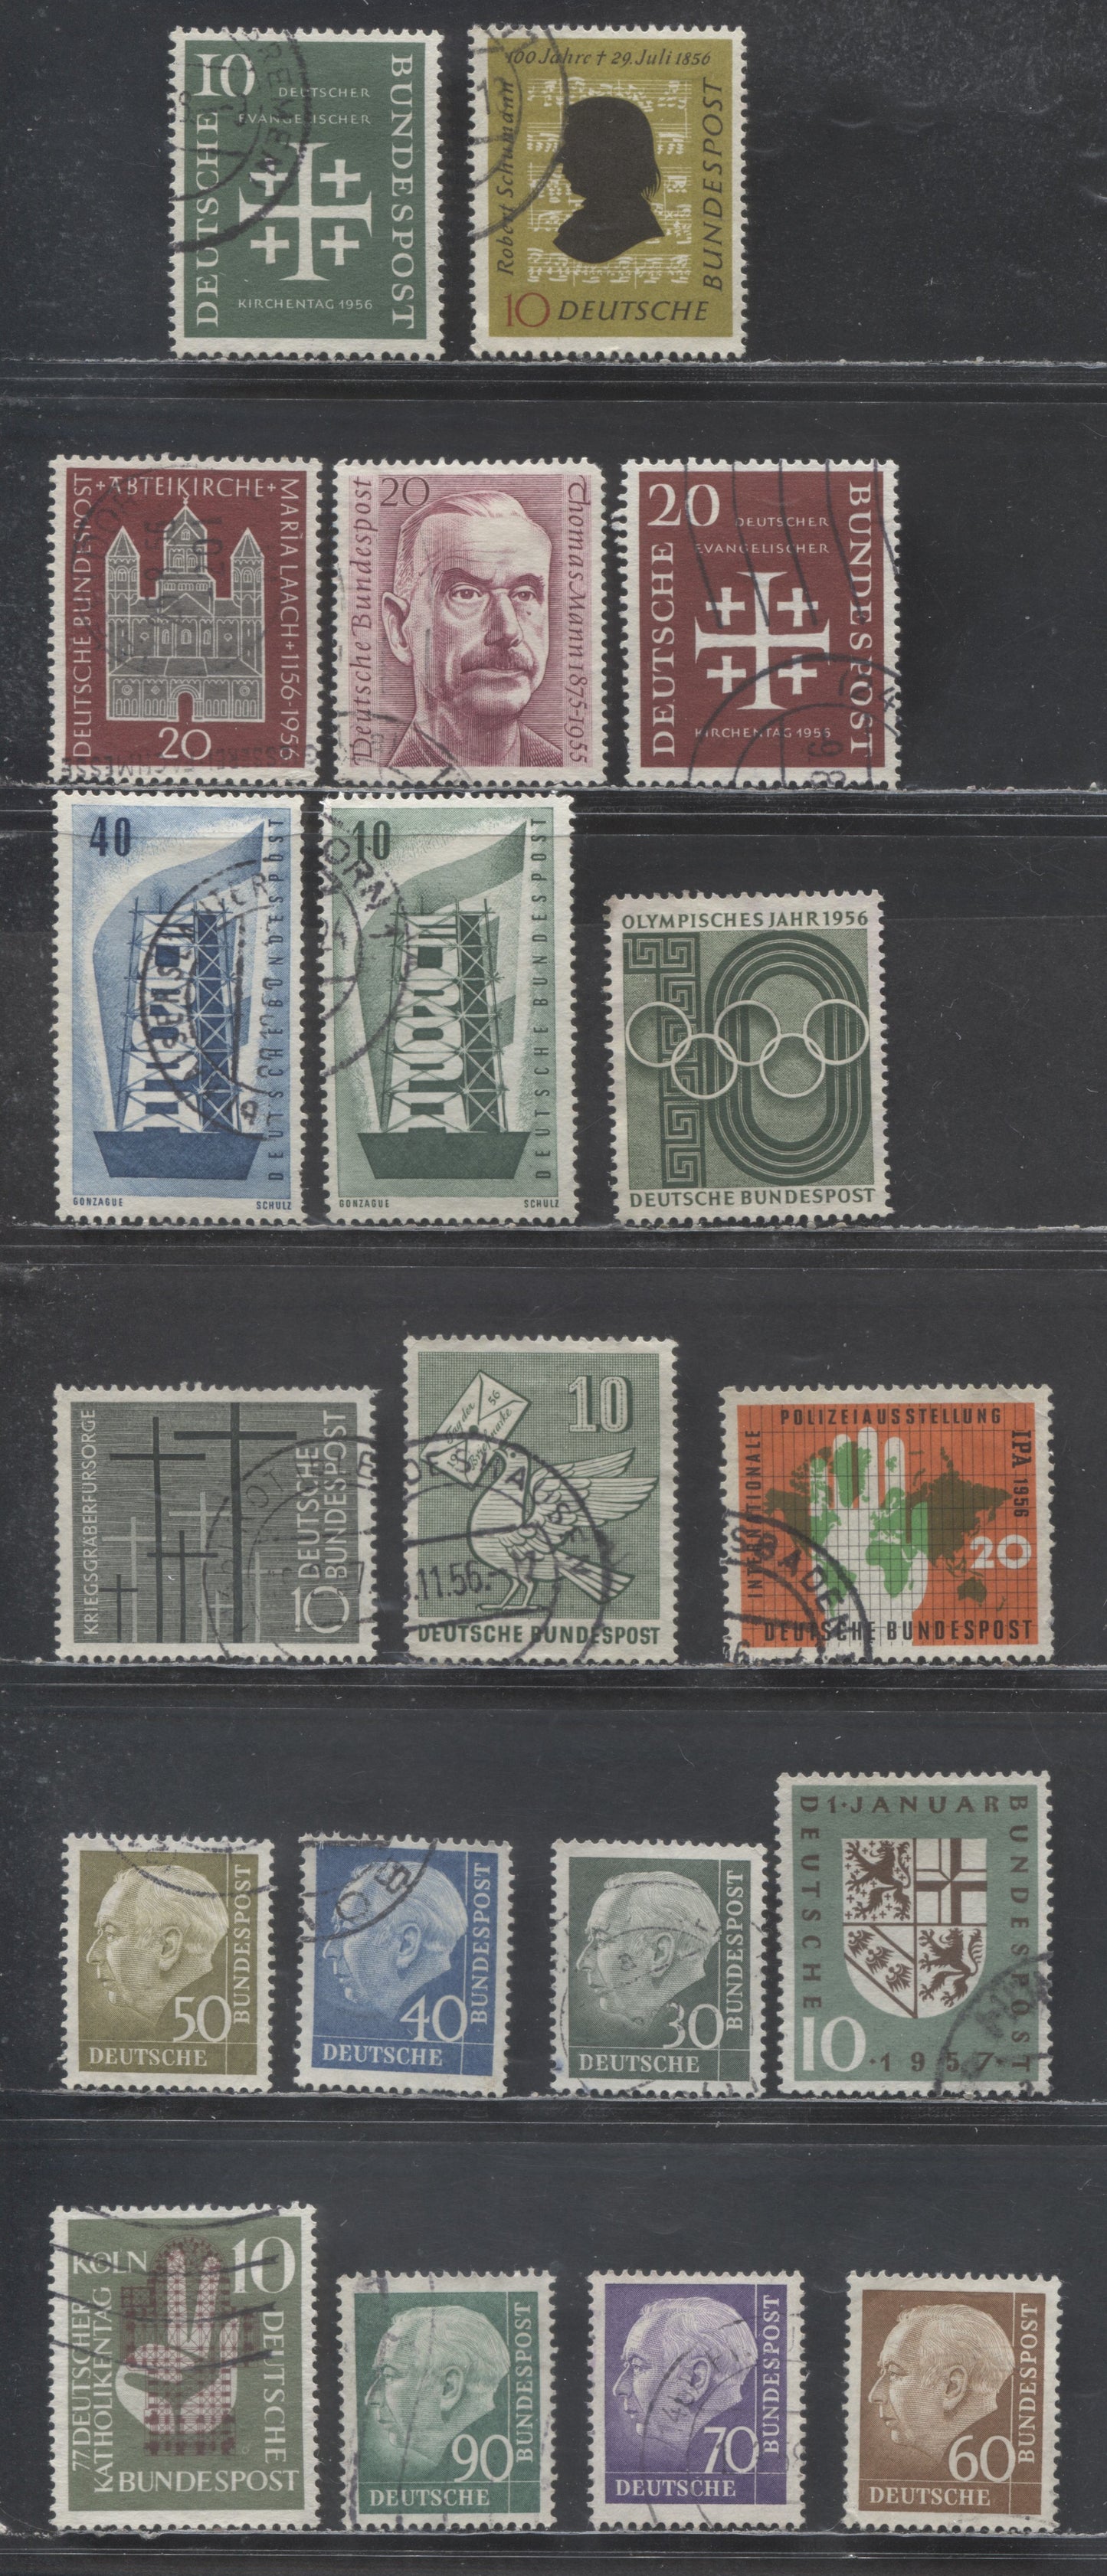 Lot 26 Germany SC#742/761 1956-1957 Schumann - Huess Definitives, 19 Very Fine Used Singles, Click on Listing to See ALL Pictures, Estimated Value $15